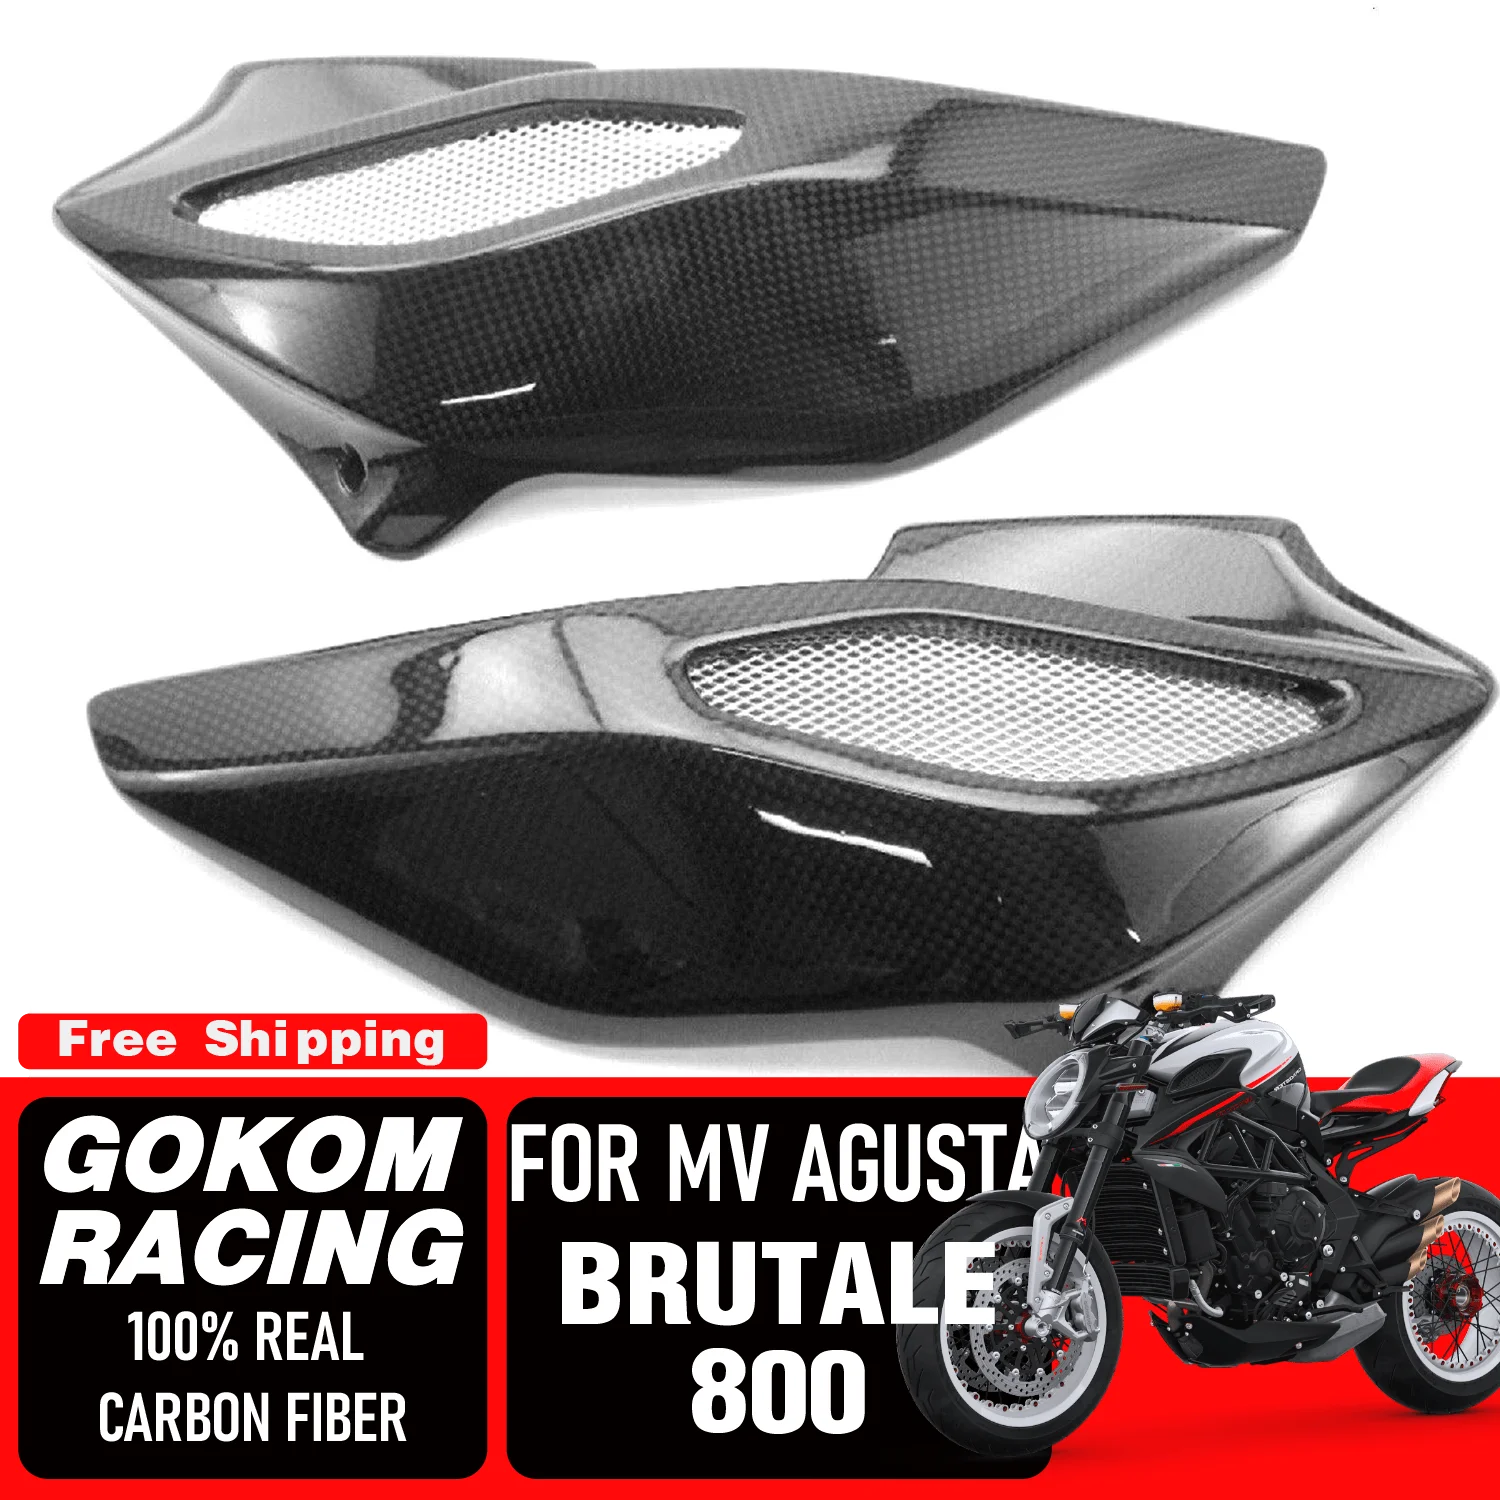 

Gokom Racing For MV AGUSTA Brutale800 Air Intake Covers COWLING FAIRING 100% REAL CARBON FIBER MOTORCYCLE ACCESSORIES